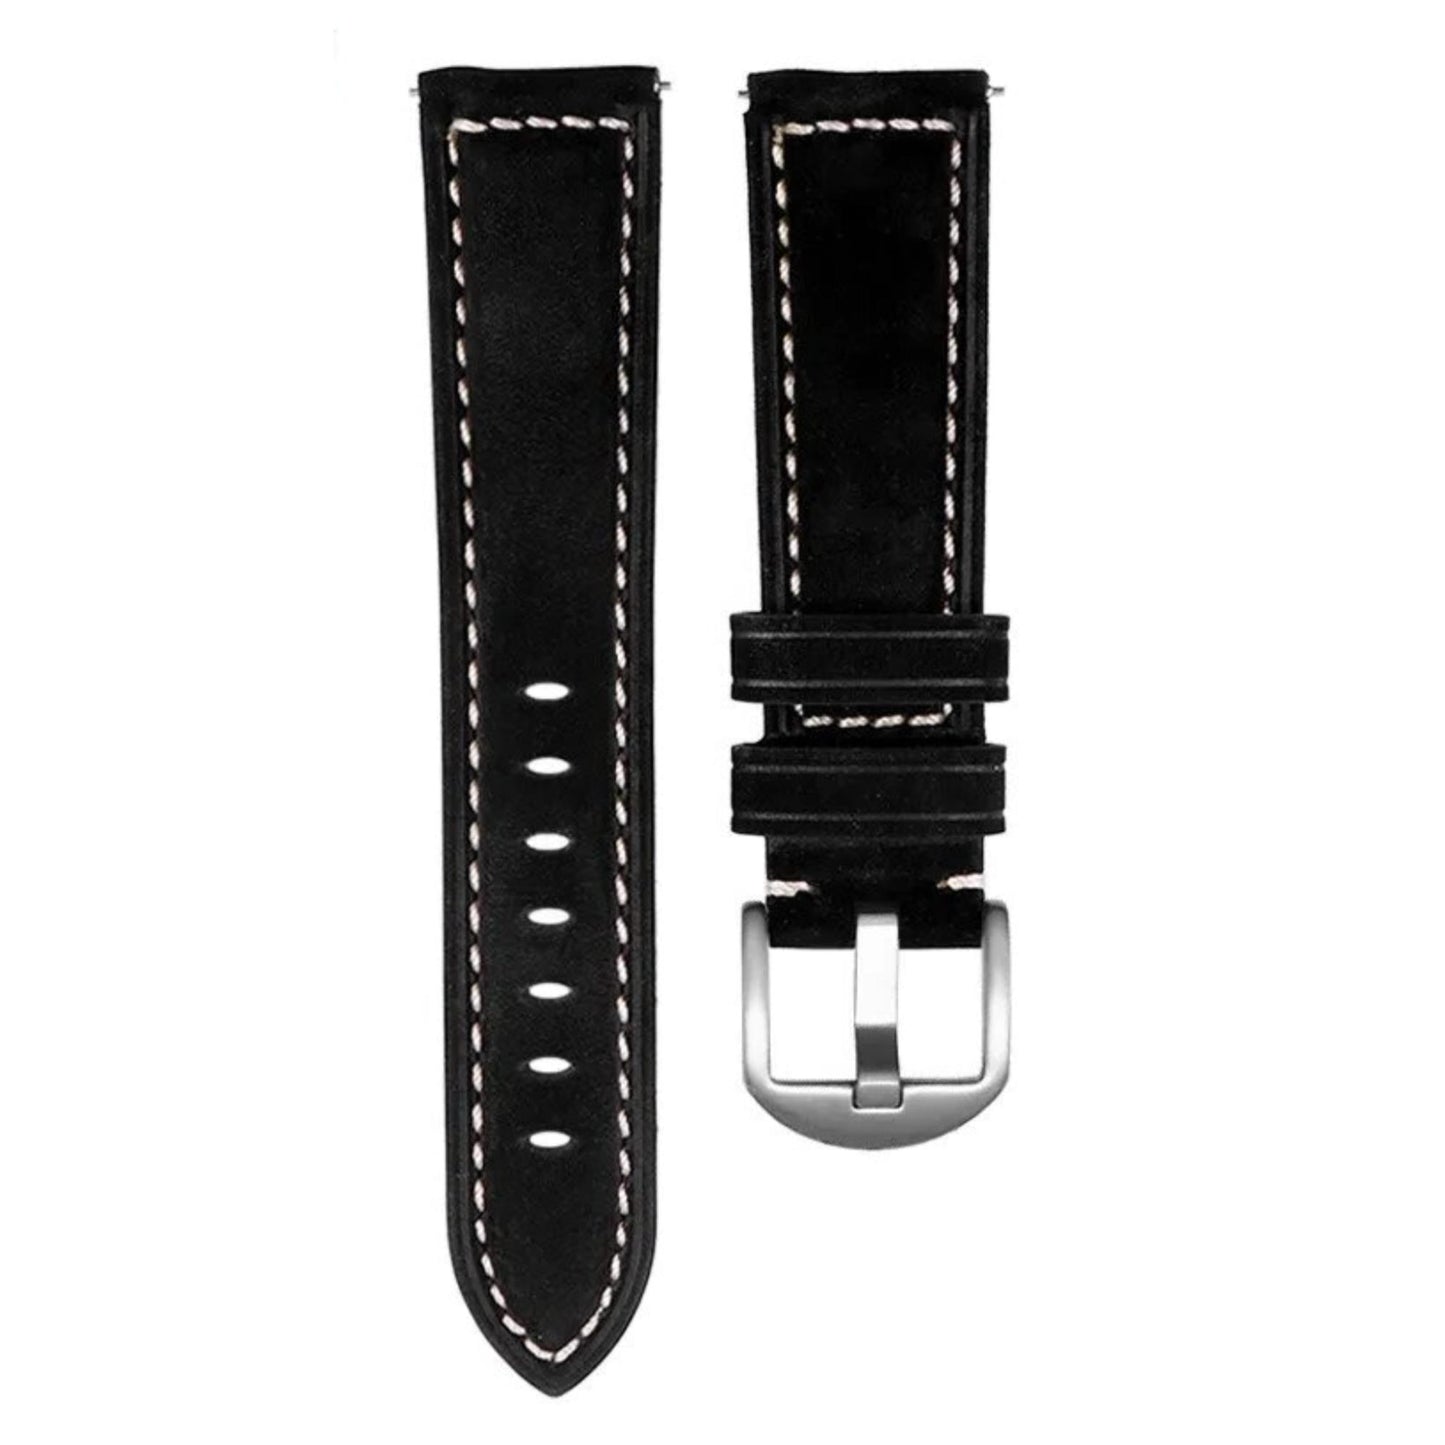 Omega Swatch MoonSwatch strap leather black